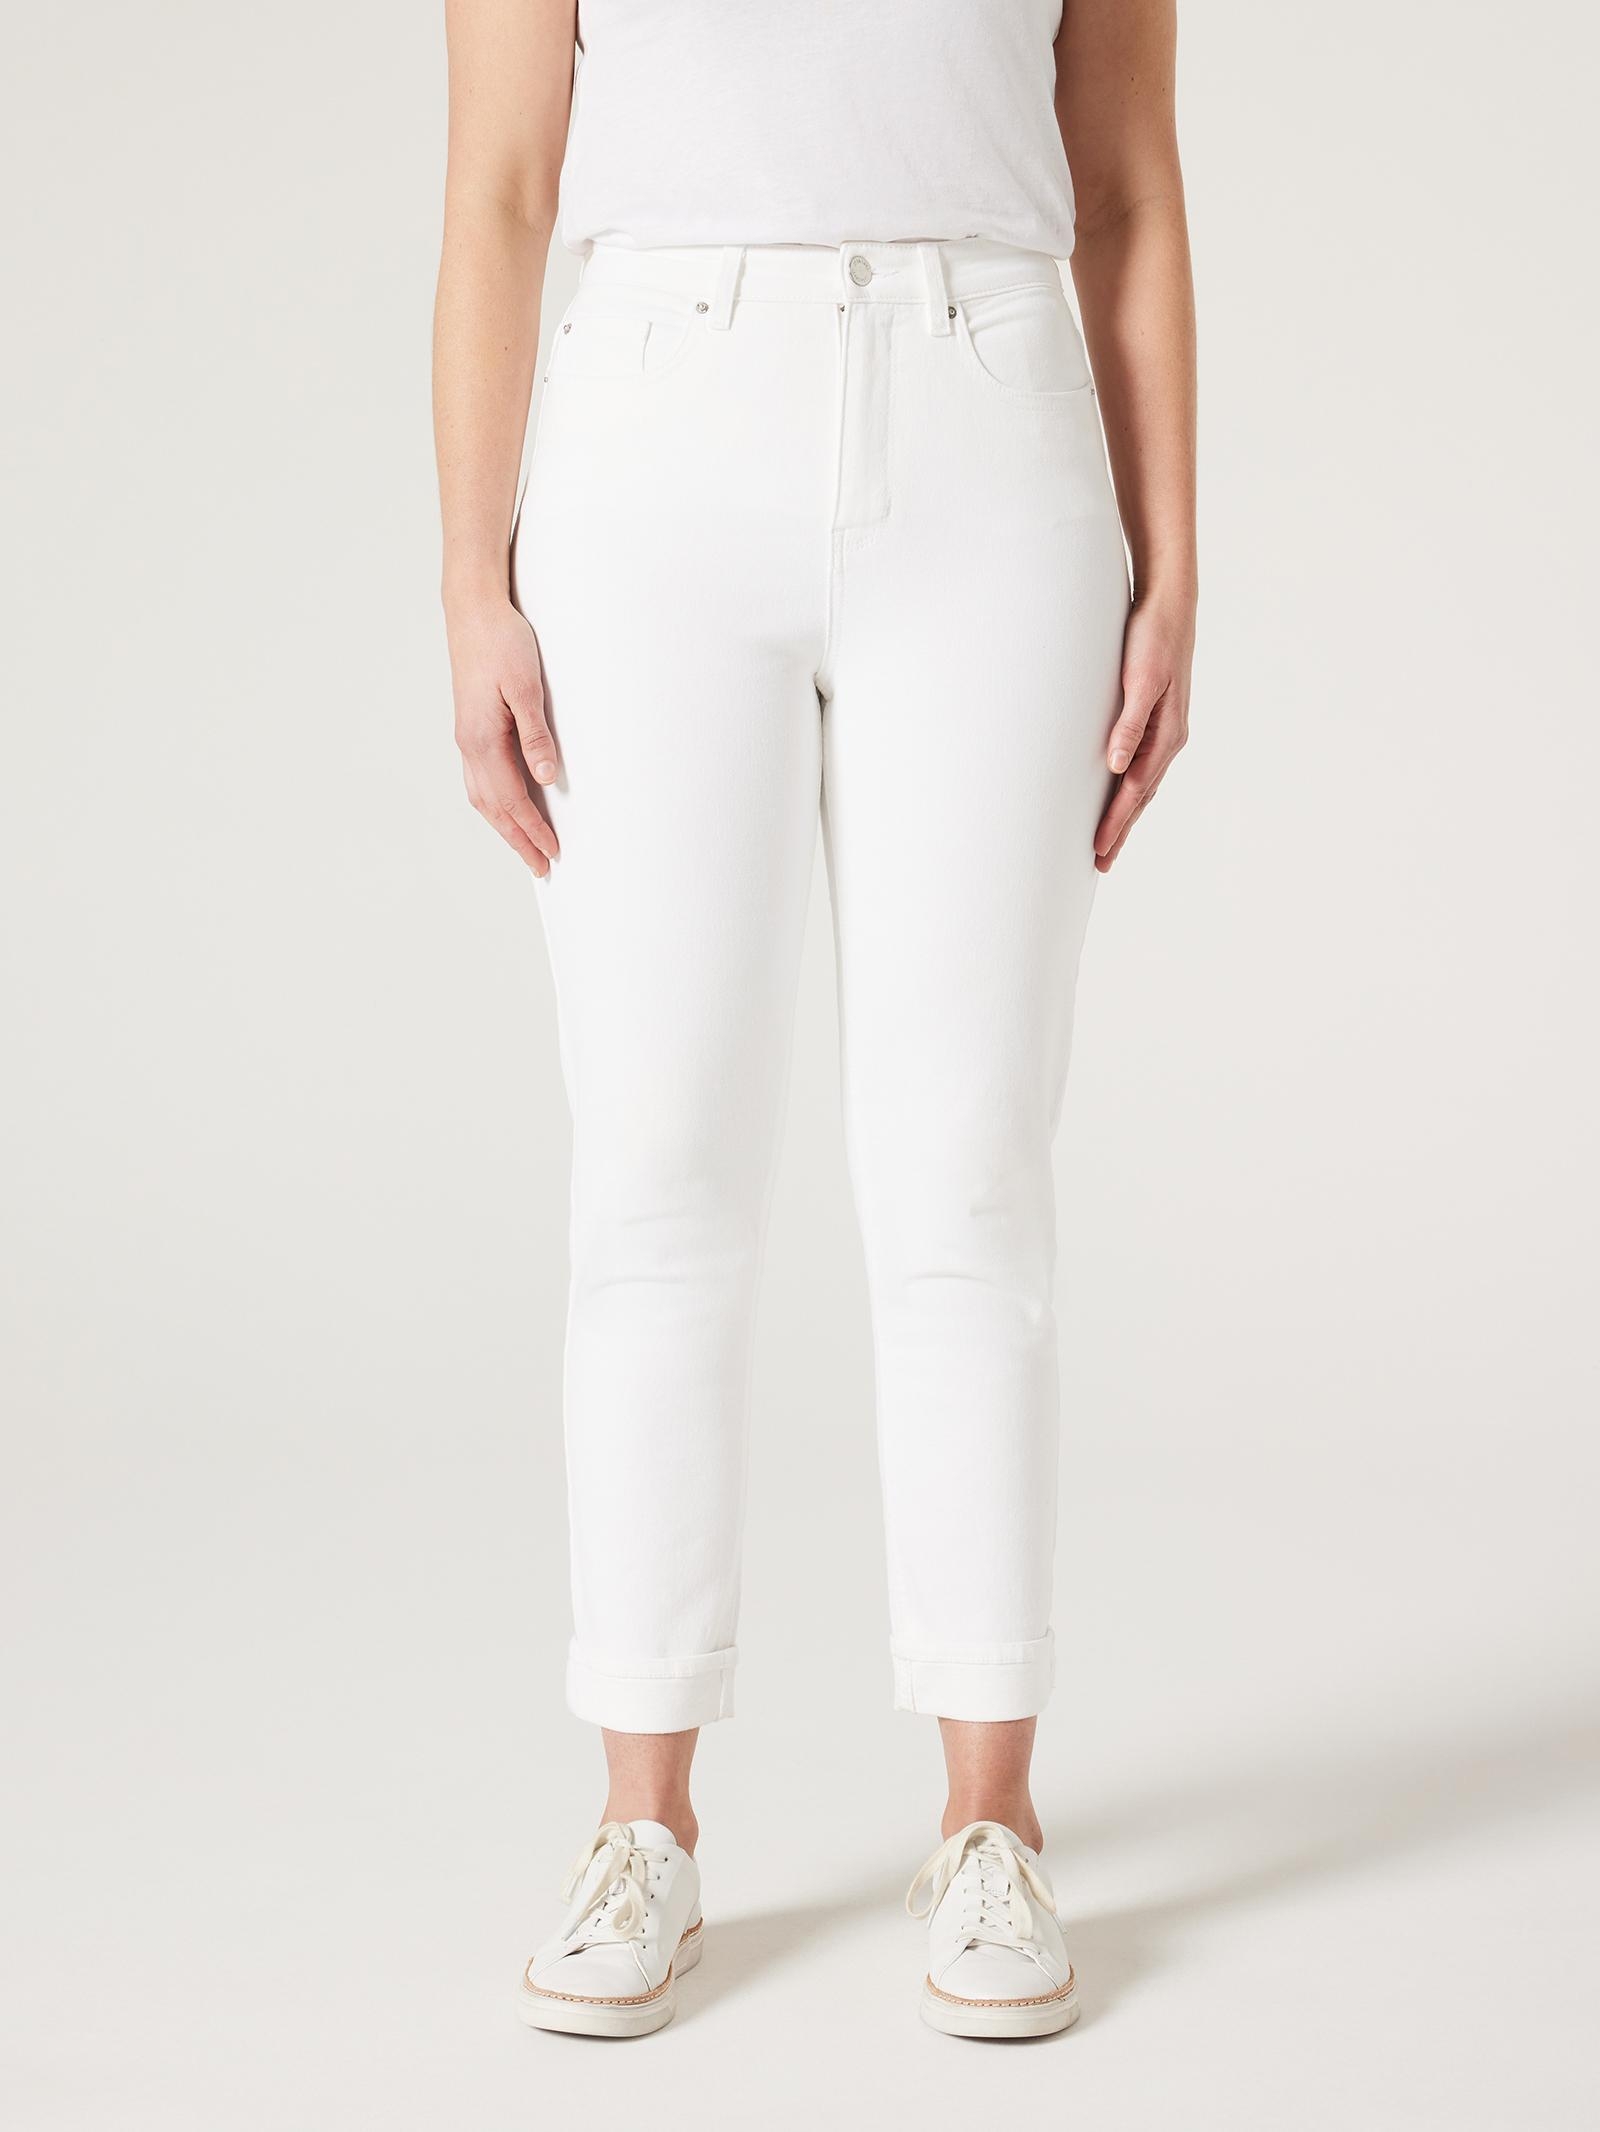 Brooke High Waisted Tapered Crop jeans | Jeanswest